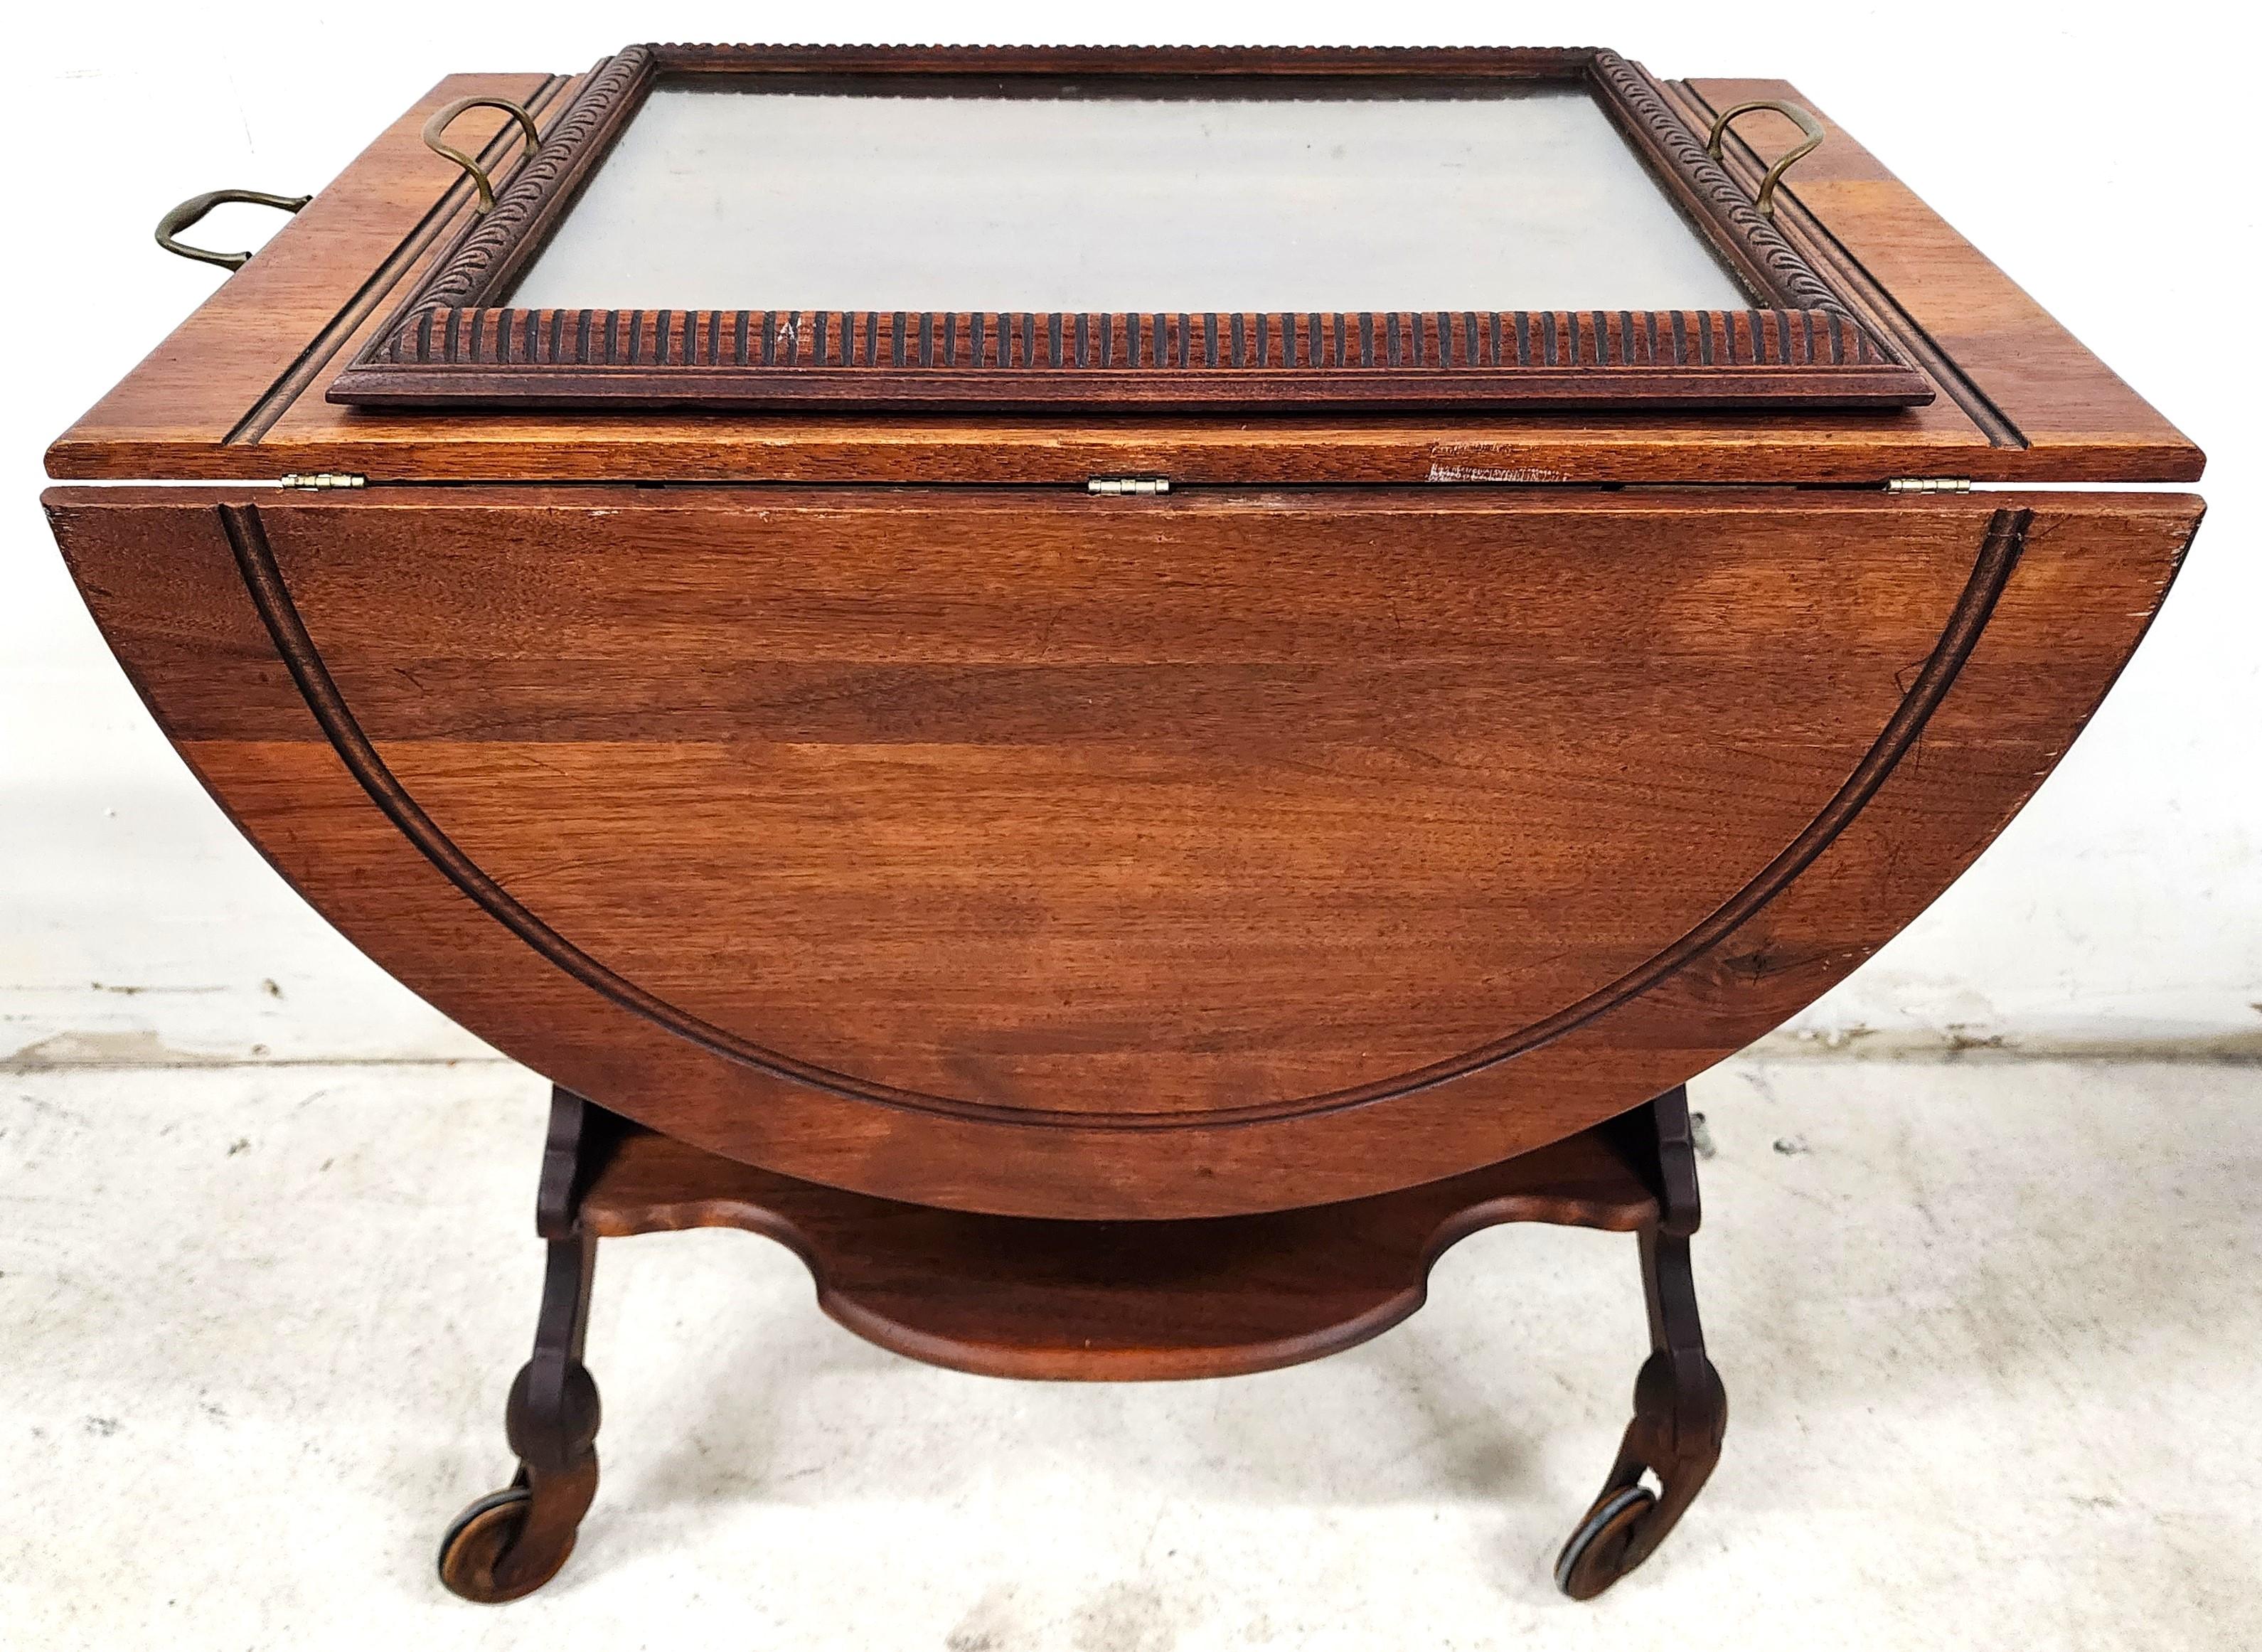 For FULL item description click on CONTINUE READING at the bottom of this page.

Offering One Of Our Recent Palm Beach Estate Fine Furniture Acquisitions Of An
Antique 1800s Drop Leaf Serving Cart Sideboard Rolling with Original Glass Serving